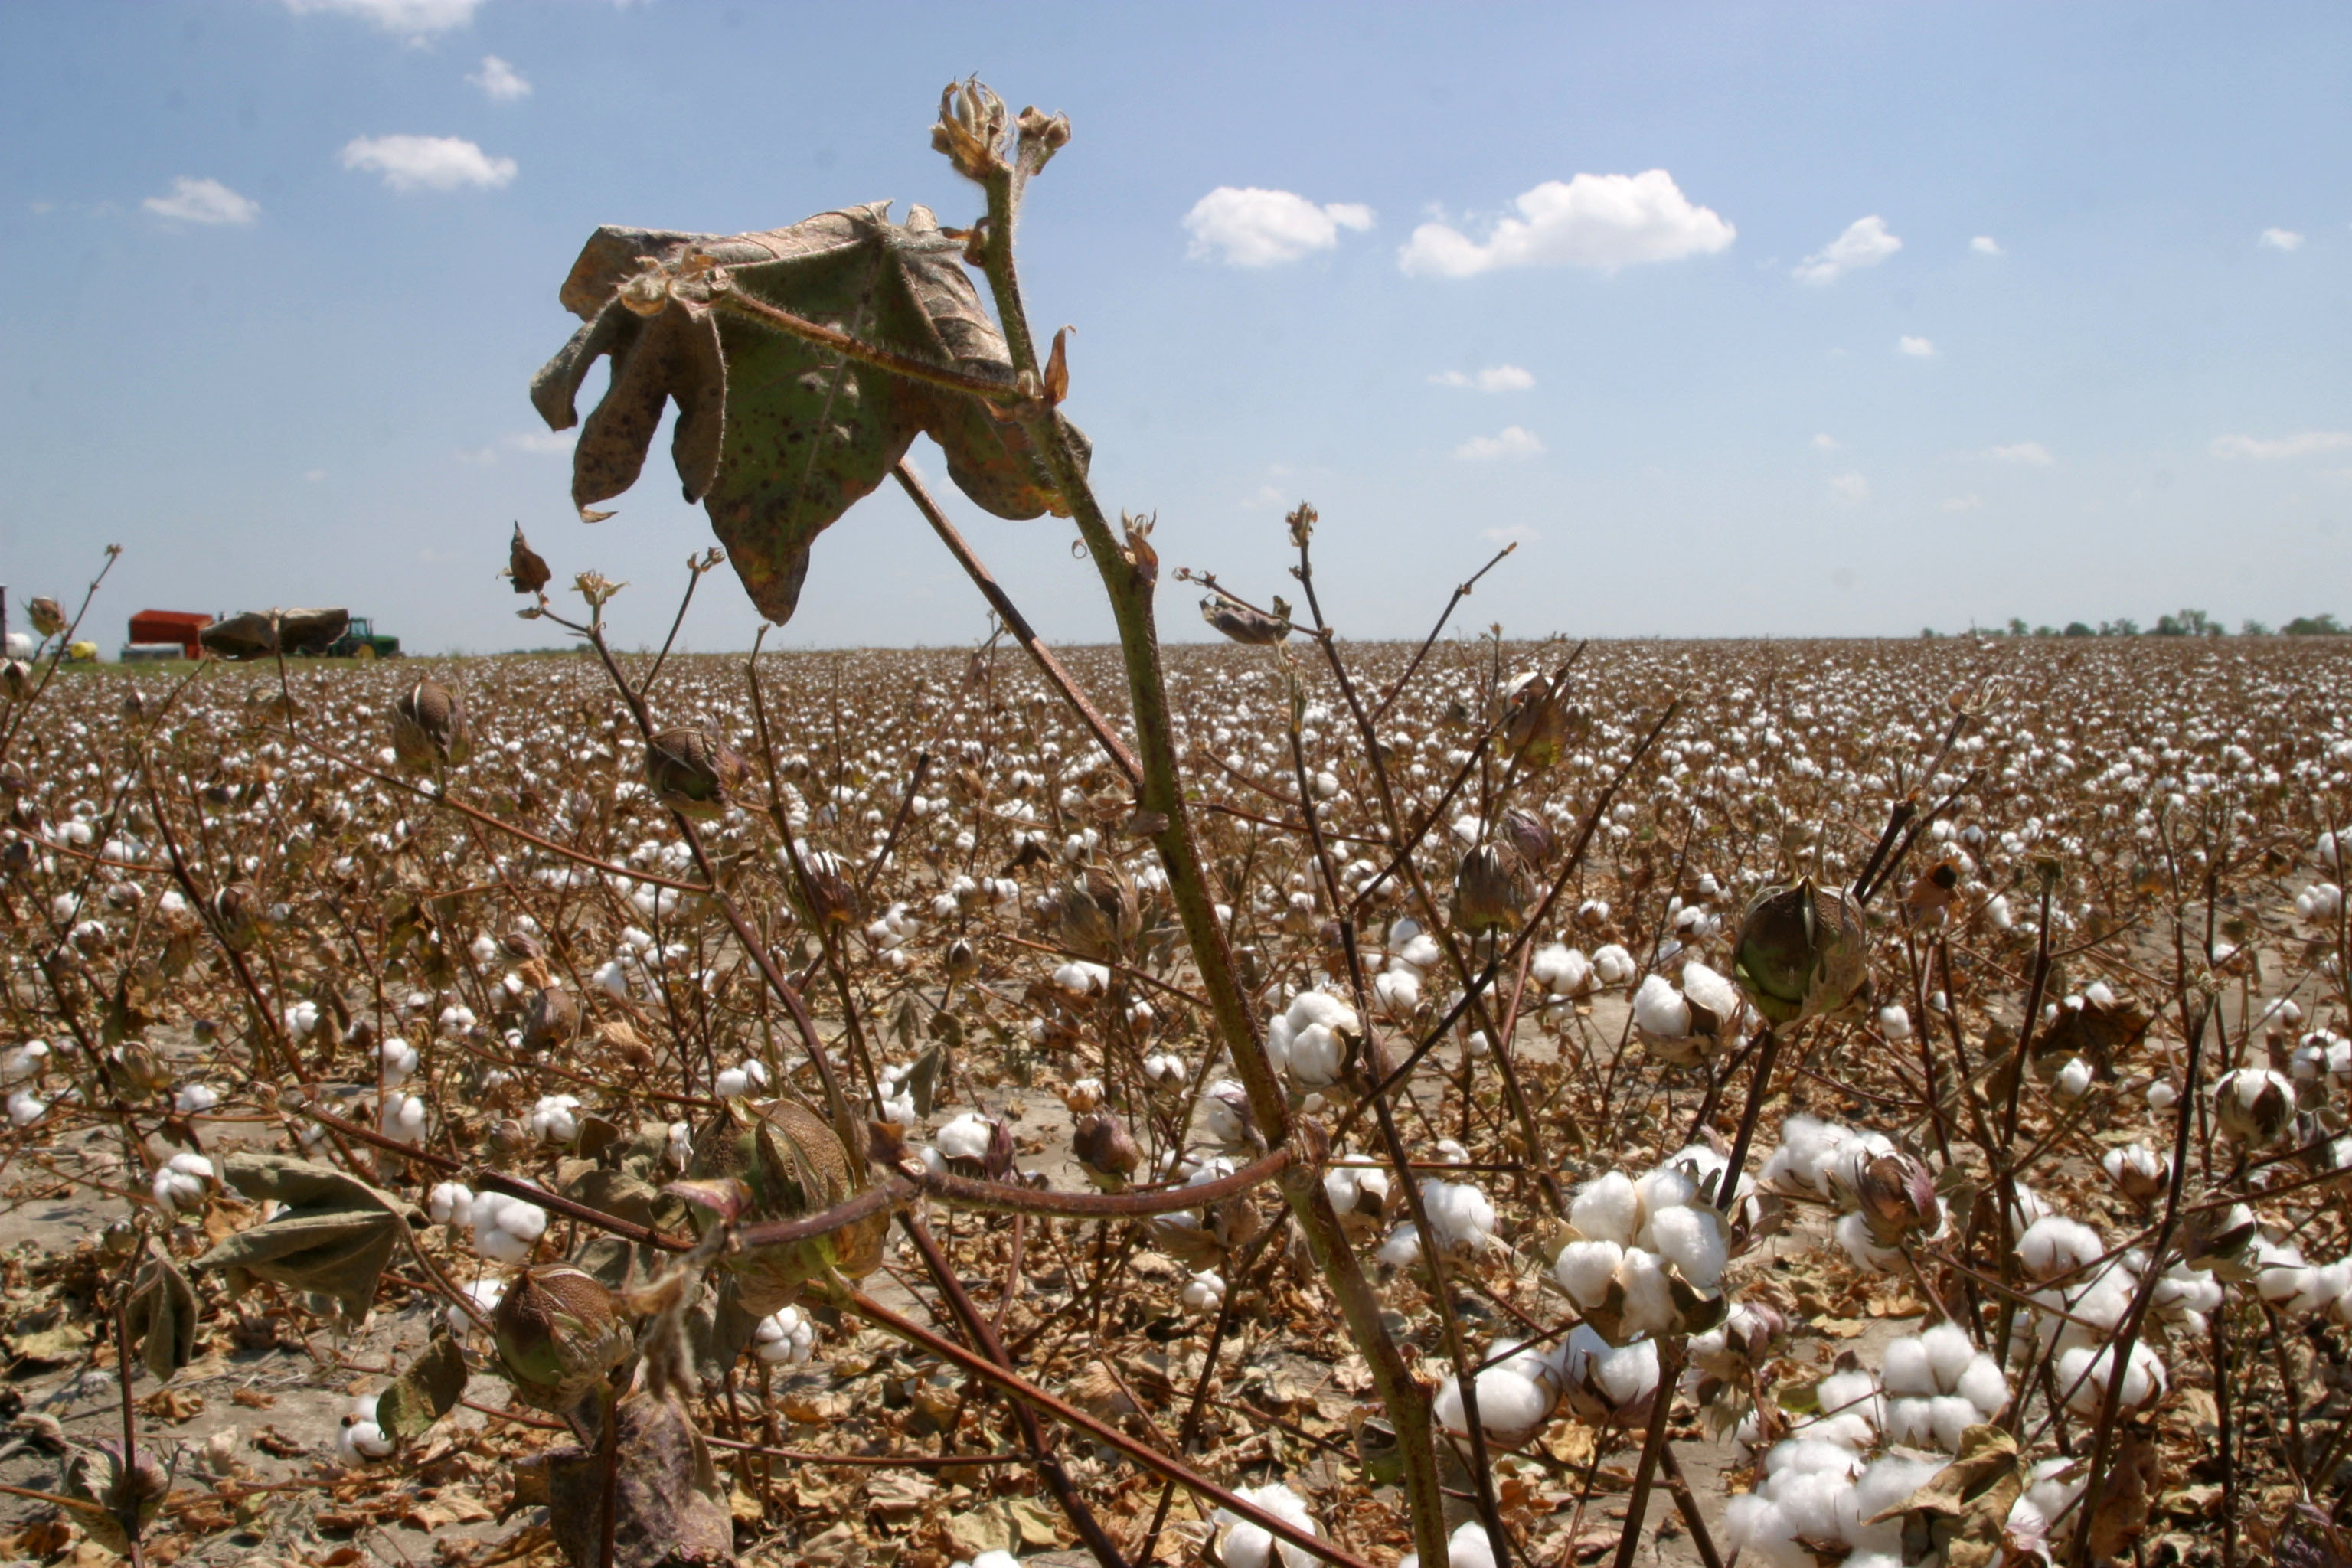 A field of cotton is parched by the sun in Lamar County near Paris, in northeast Texas as the temperature hit 104 degrees on August 16, 2006.&nbsp;